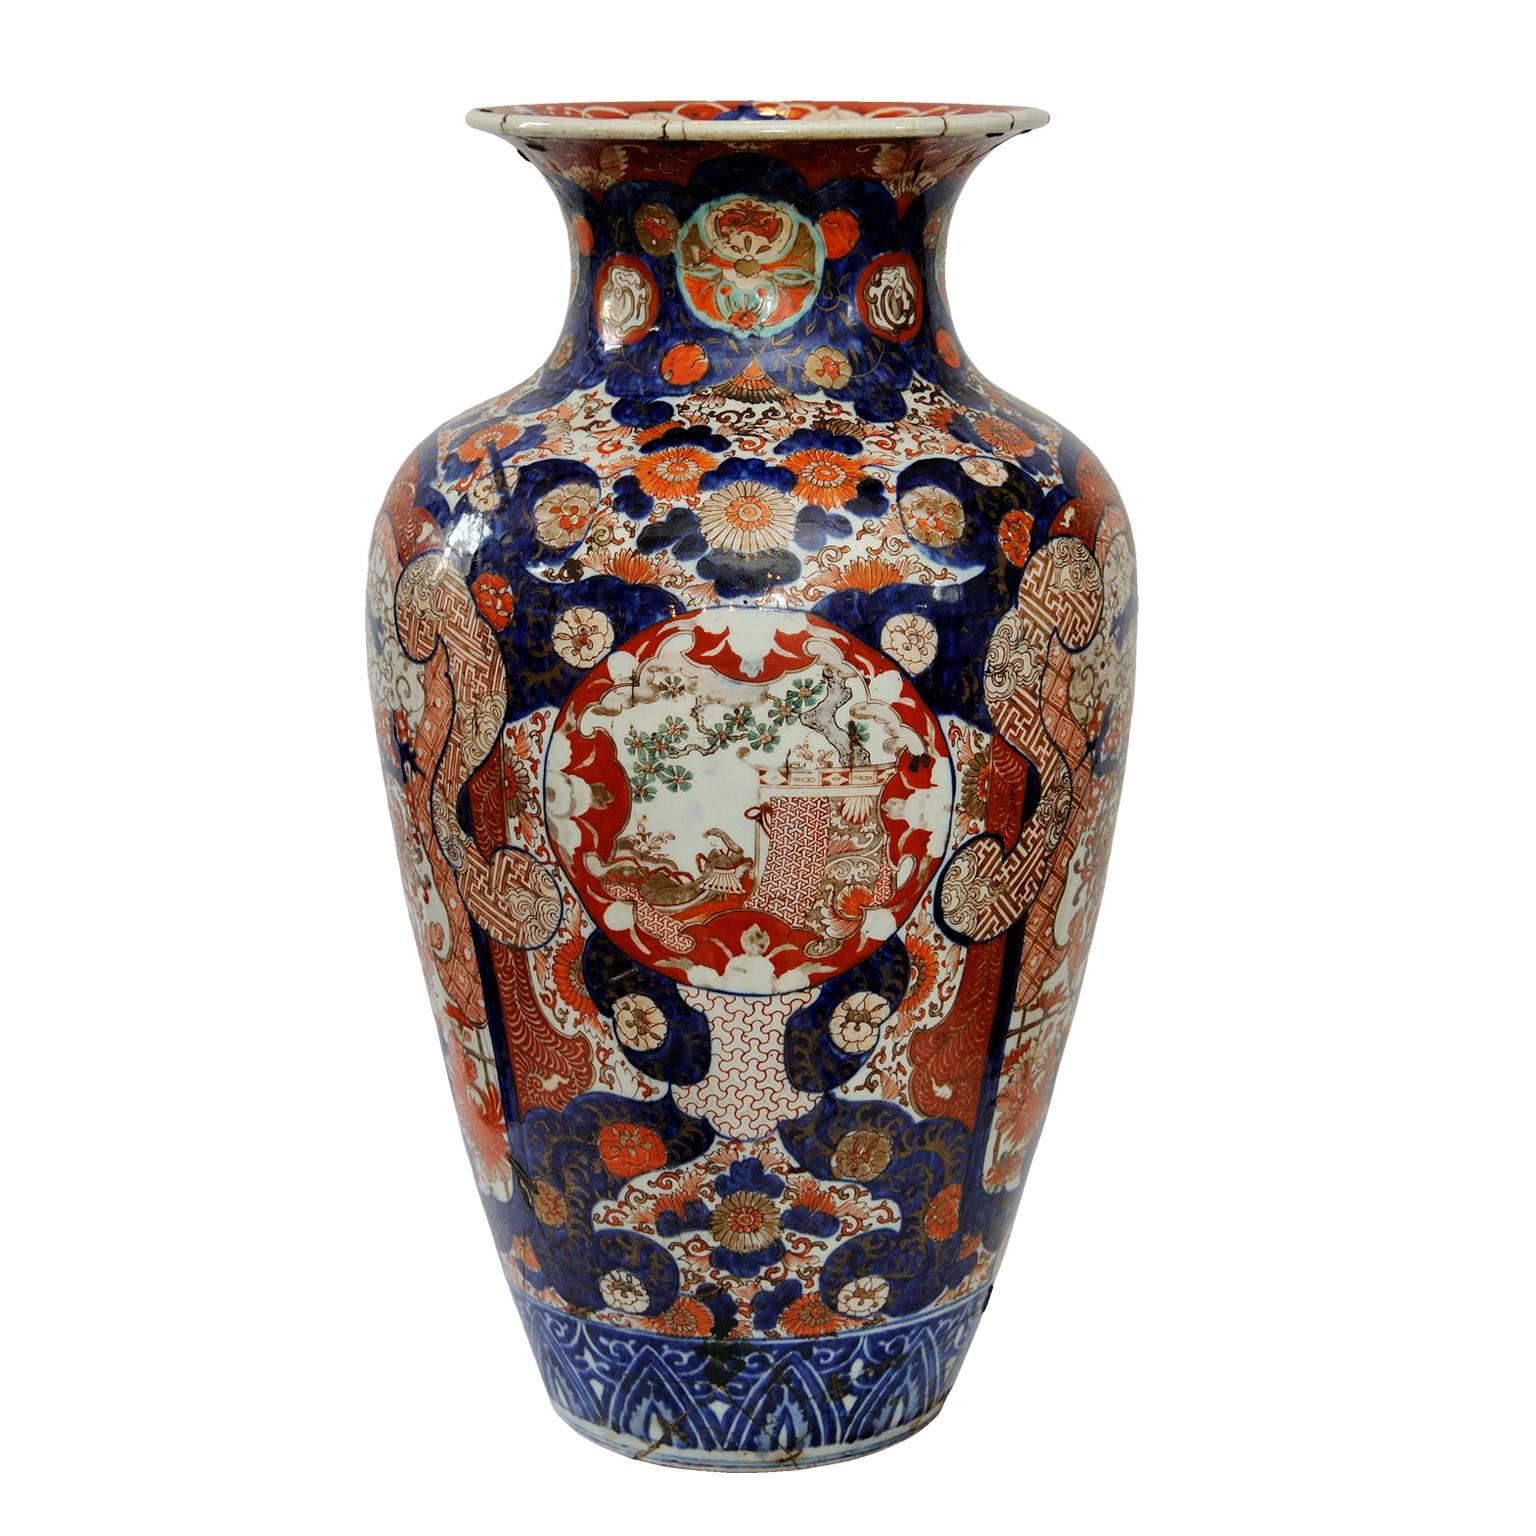 This is a massive and really rather beautiful, mid-19th century Japanese Imari vase, complete with old 19th century tinker staple repairs, circa 1840. 
A lovely piece with great charisma and presence.